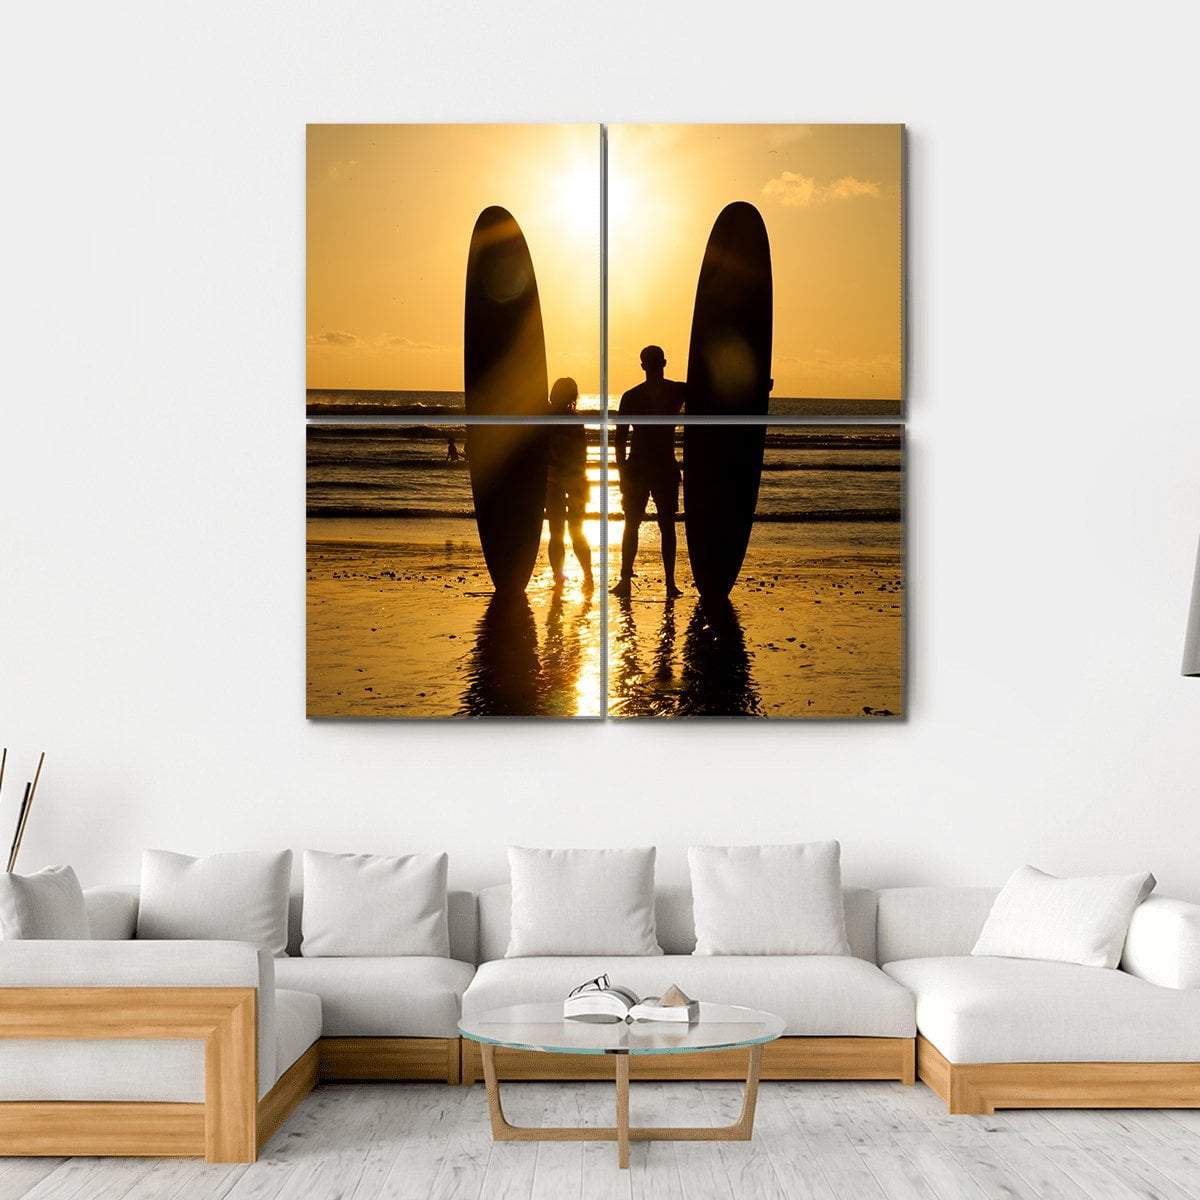 Surfer Couple Holding Long Surf Boards At Sunset On Beach Canvas